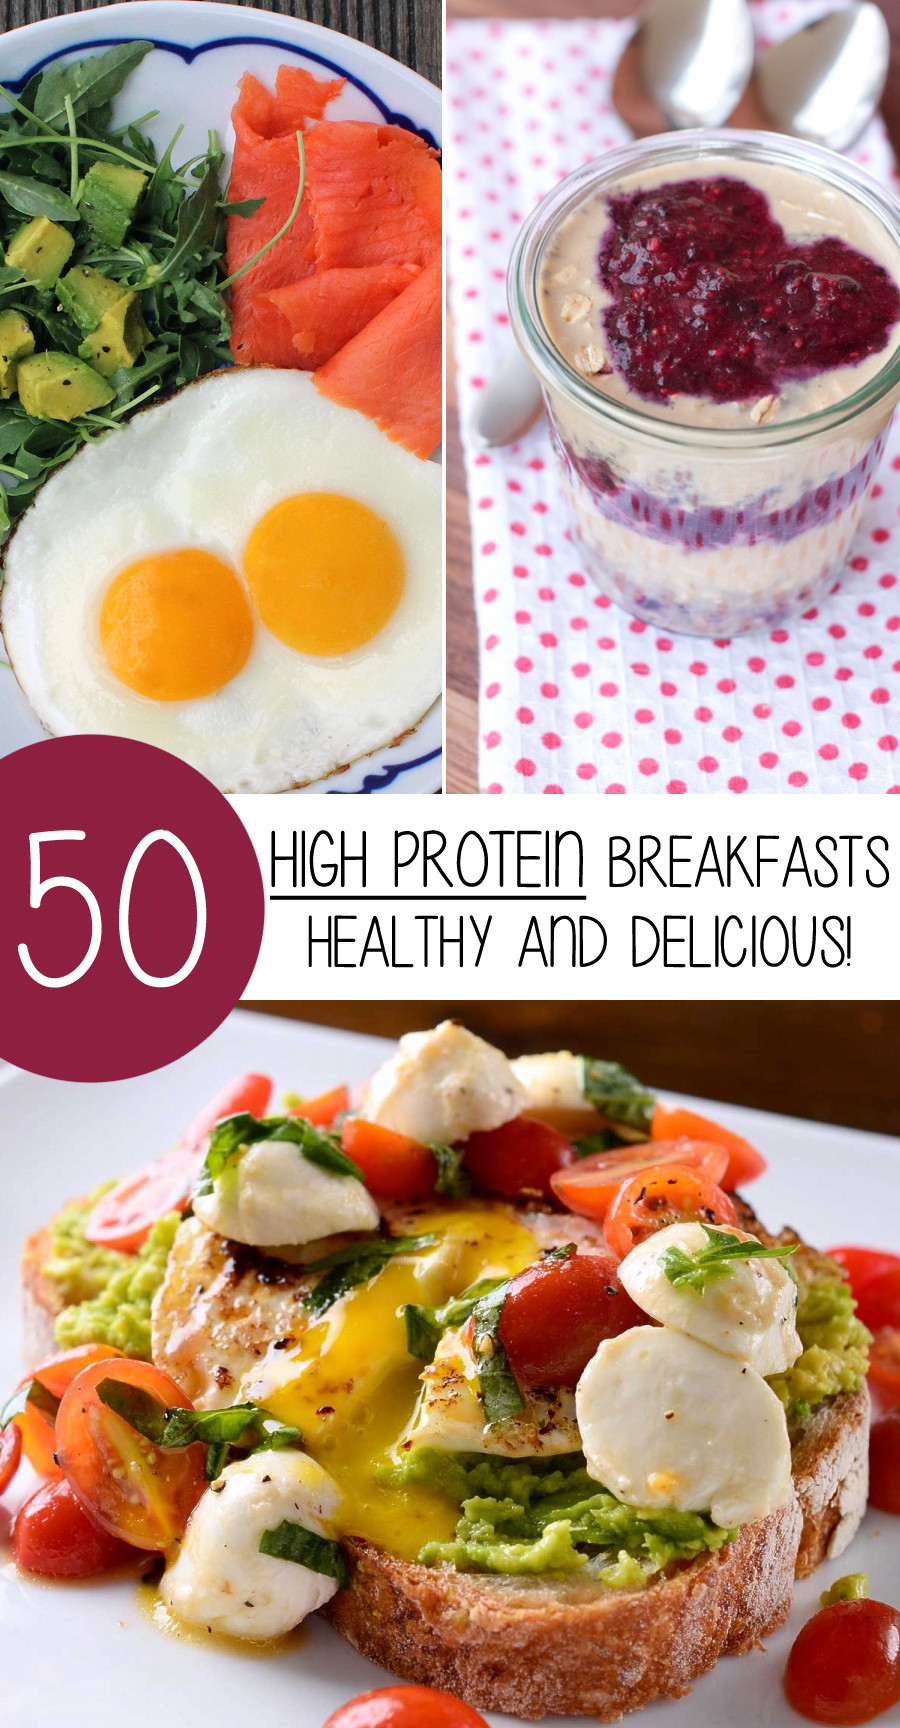 Healthy High Protein Breakfast
 50 High Protein Breakfasts That Are Healthy And Delicious